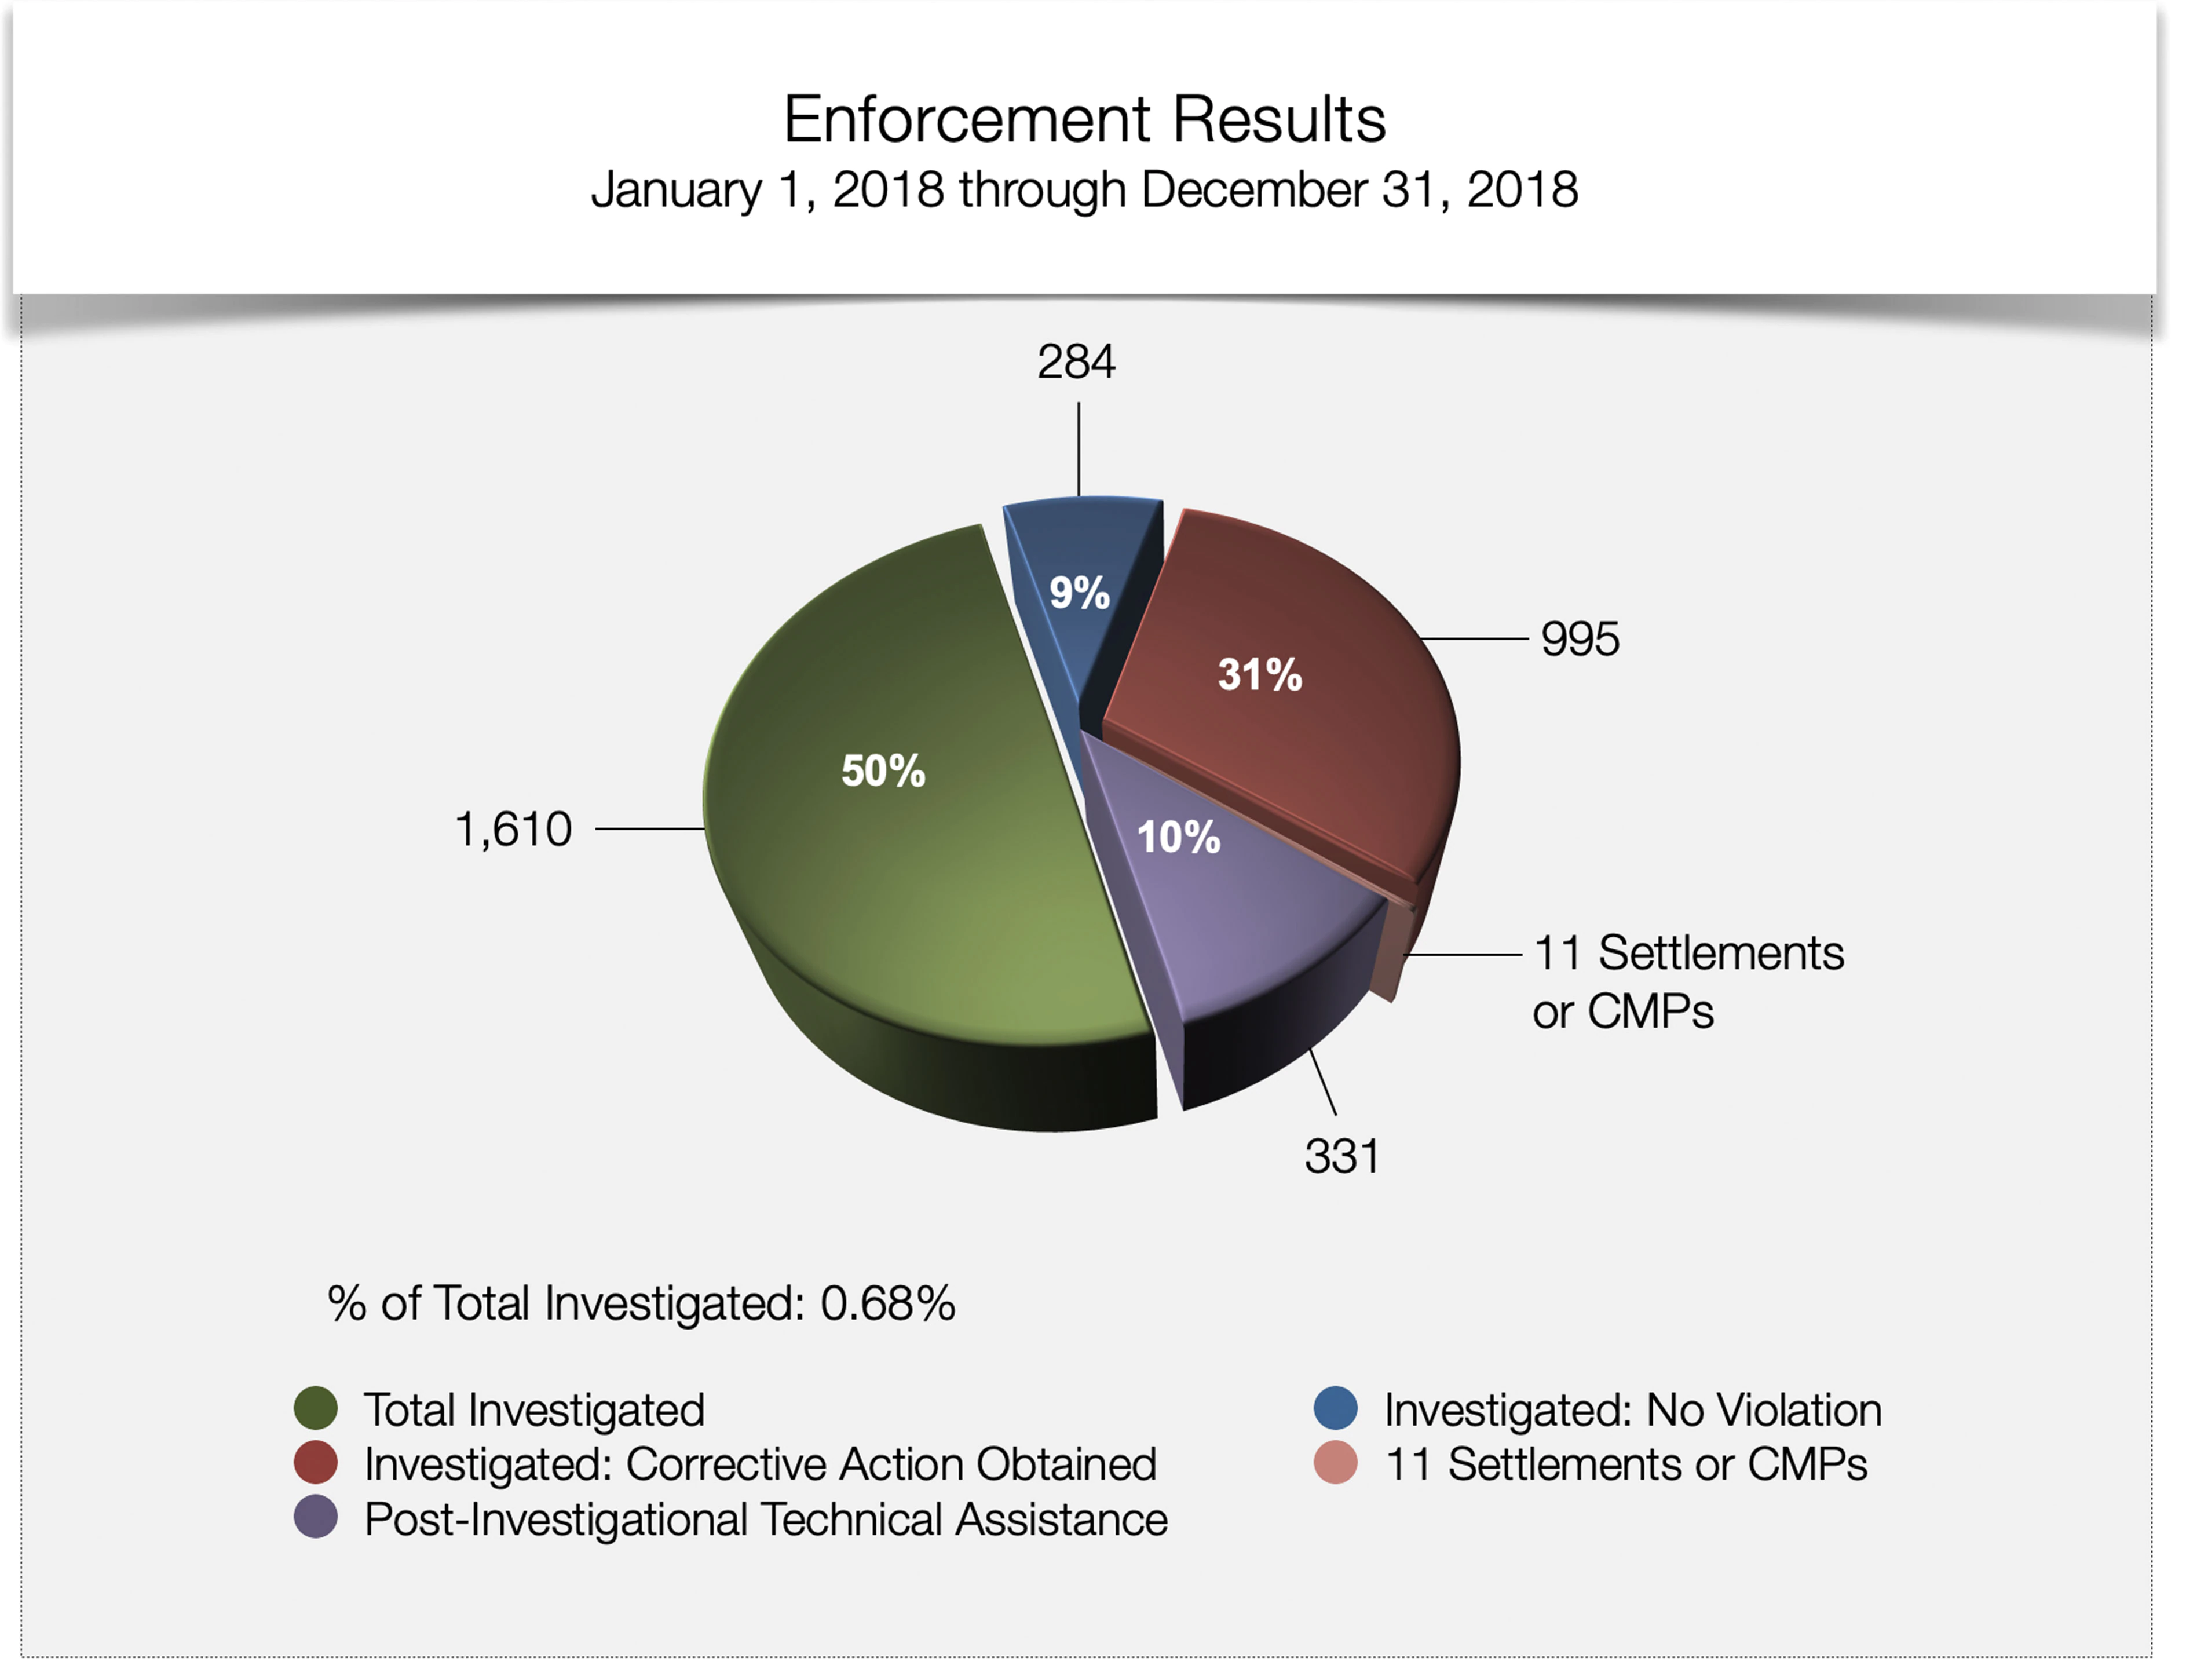 Enforcement Results - January 1, 2018 through December 31, 2018